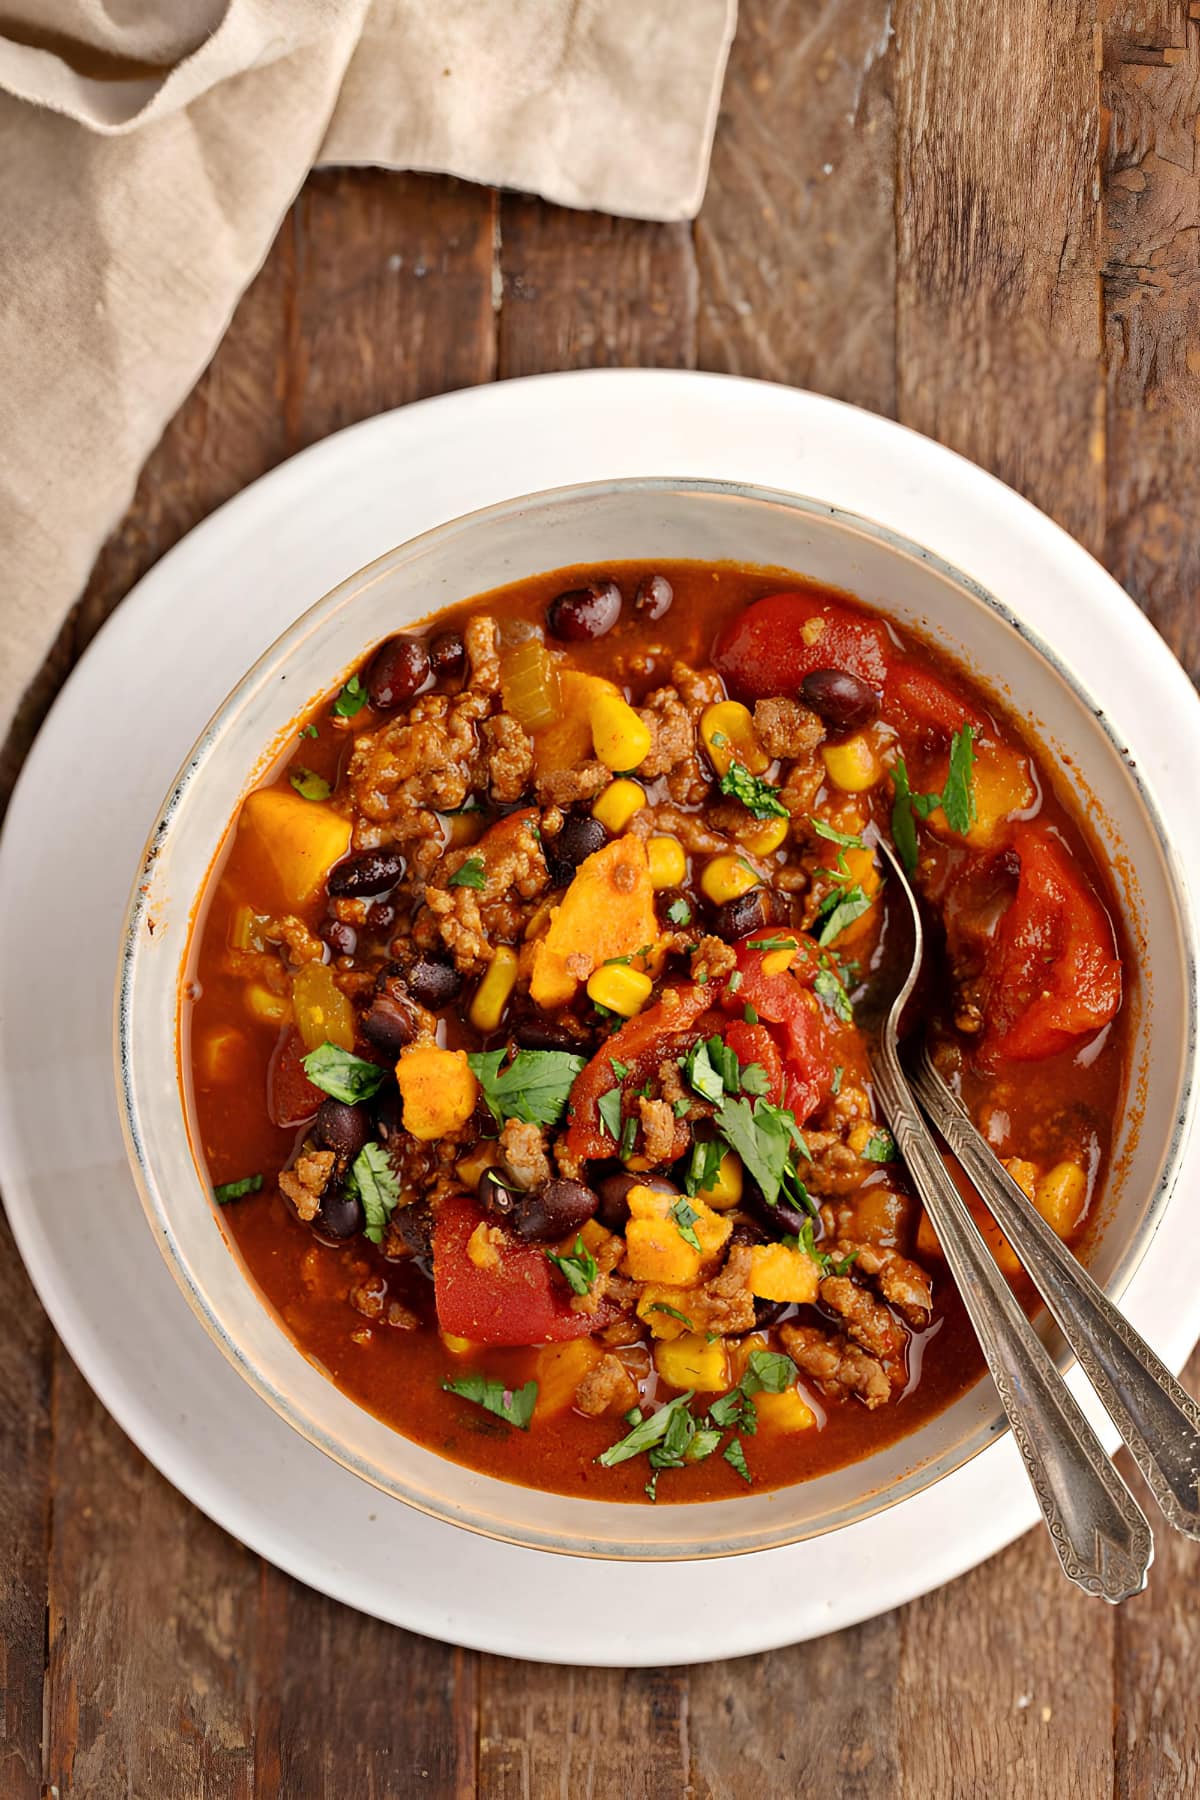 Homemade Sweet Potato Chili with Vegetables, Herbs and Tomato Sauce